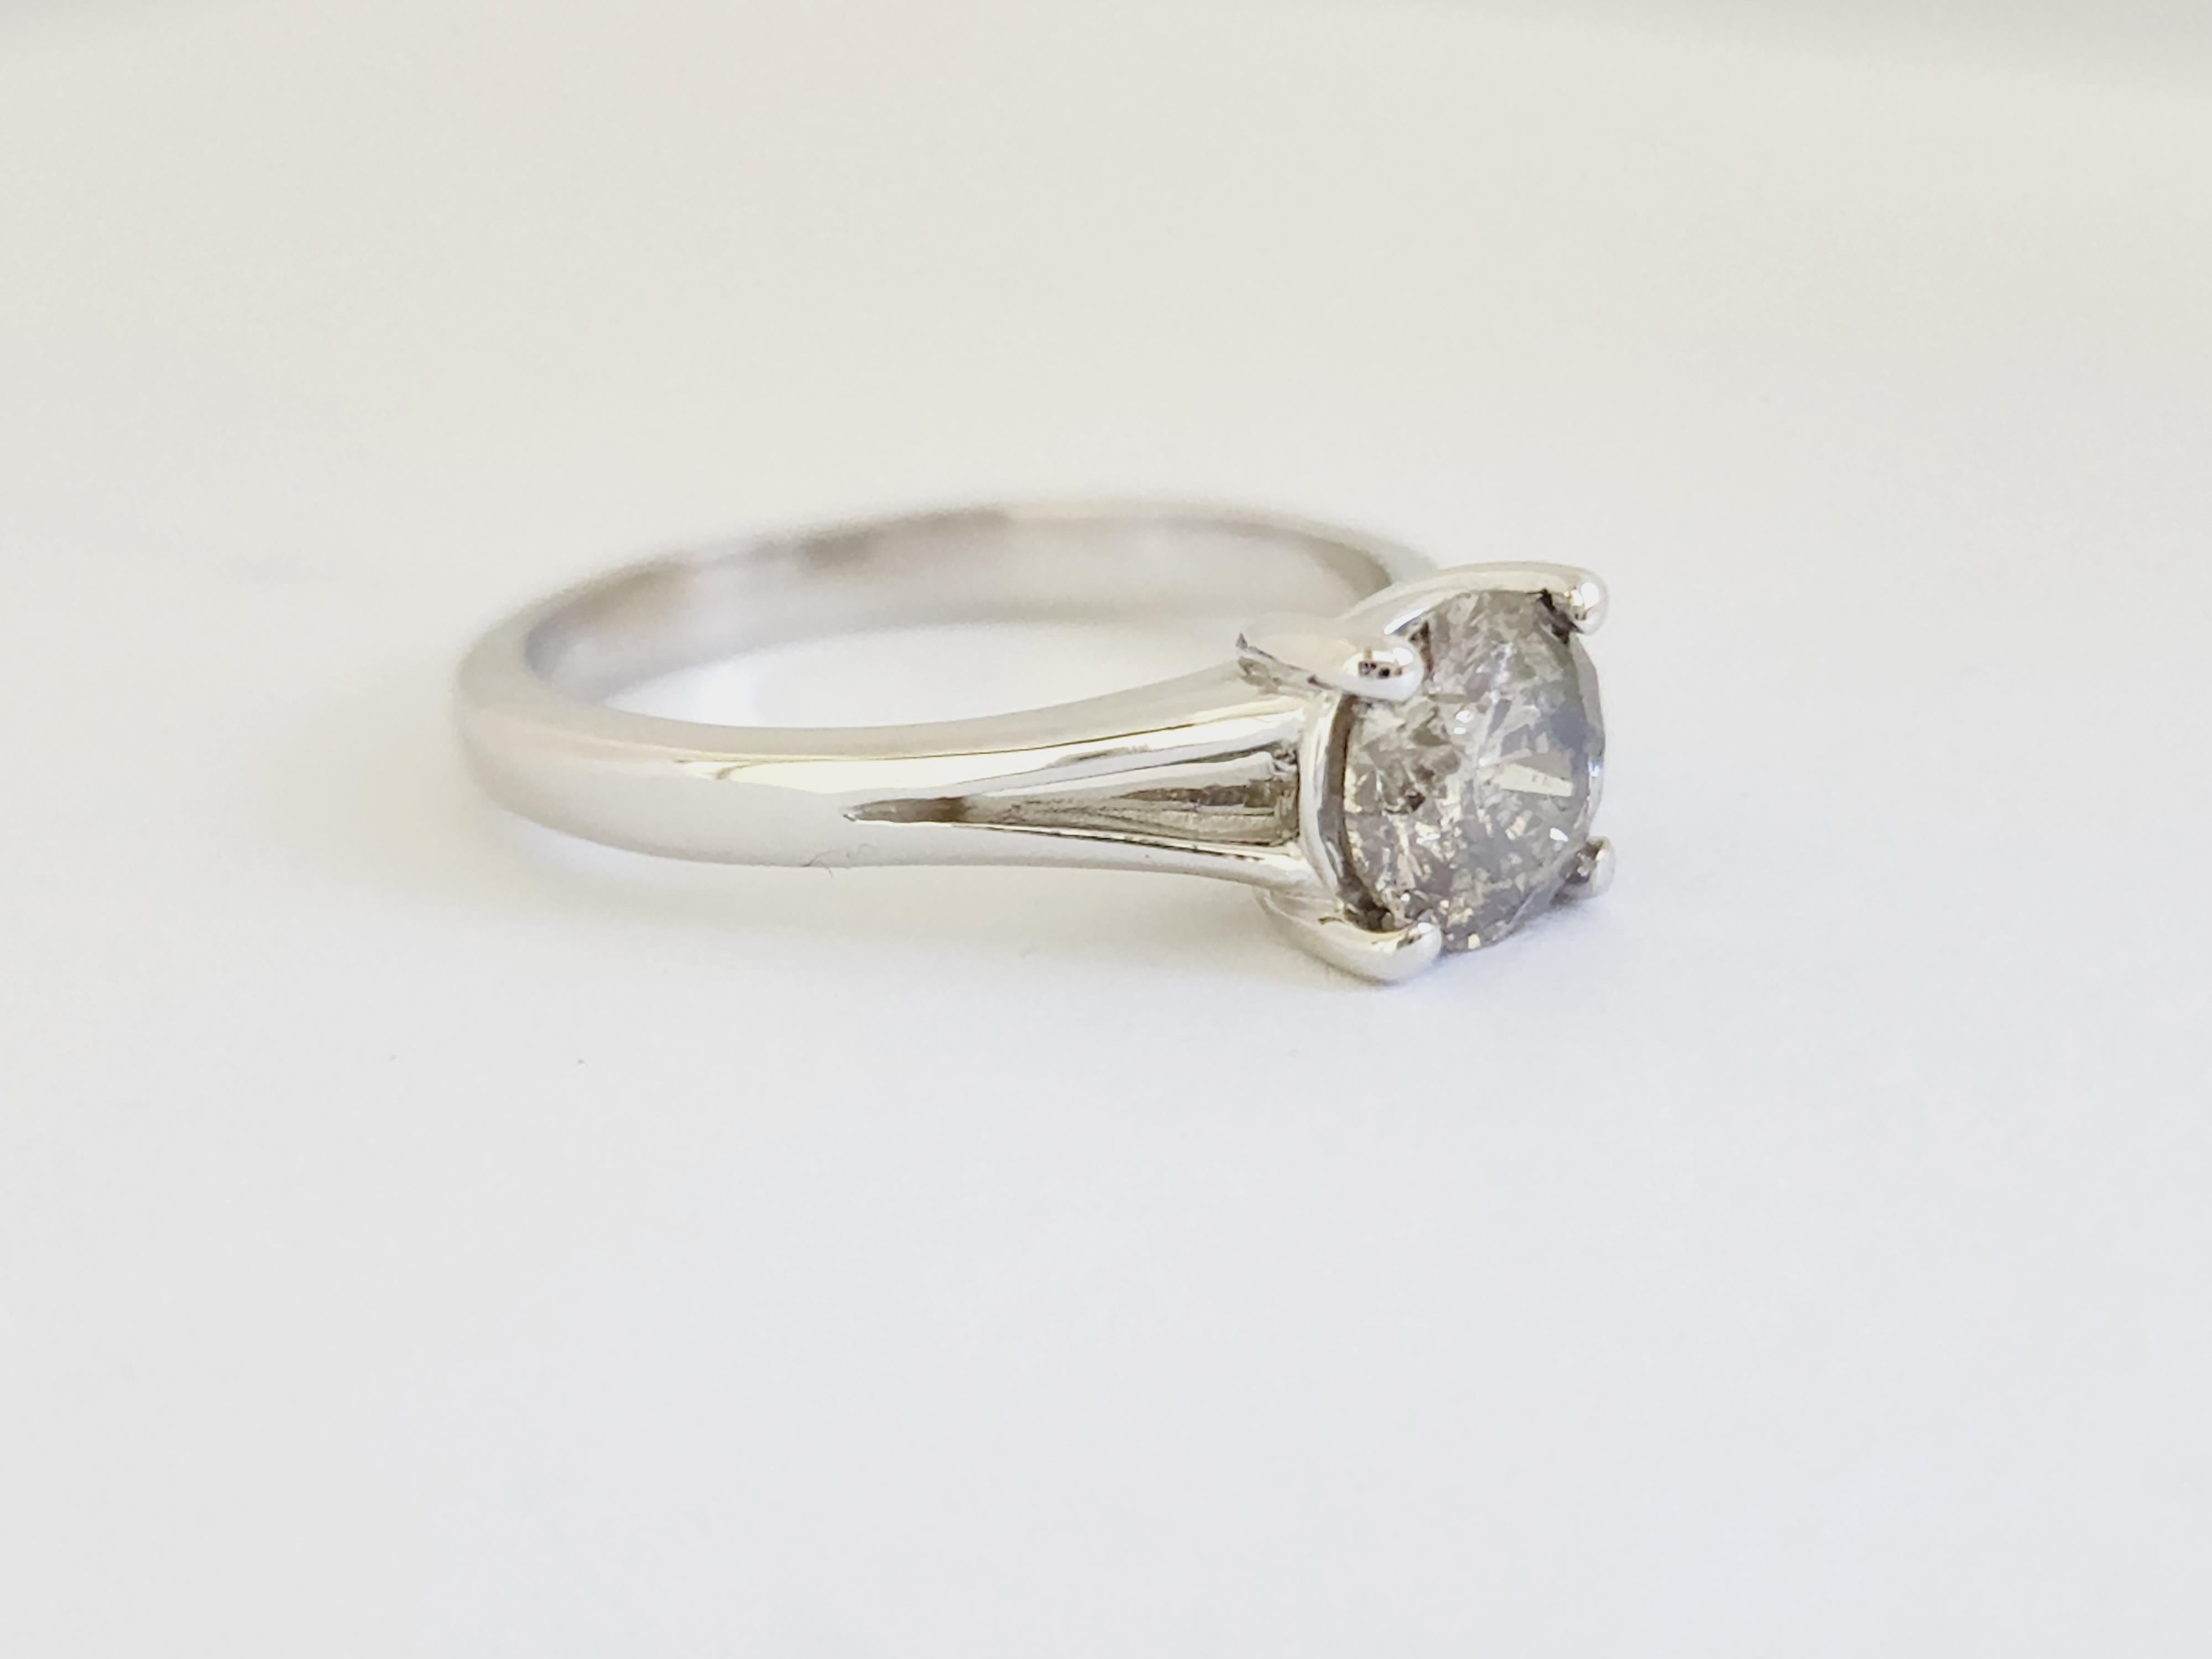 IGI 1.01 Carat Natural Round Diamond Ring 14 Karat White Gold In New Condition For Sale In Great Neck, NY